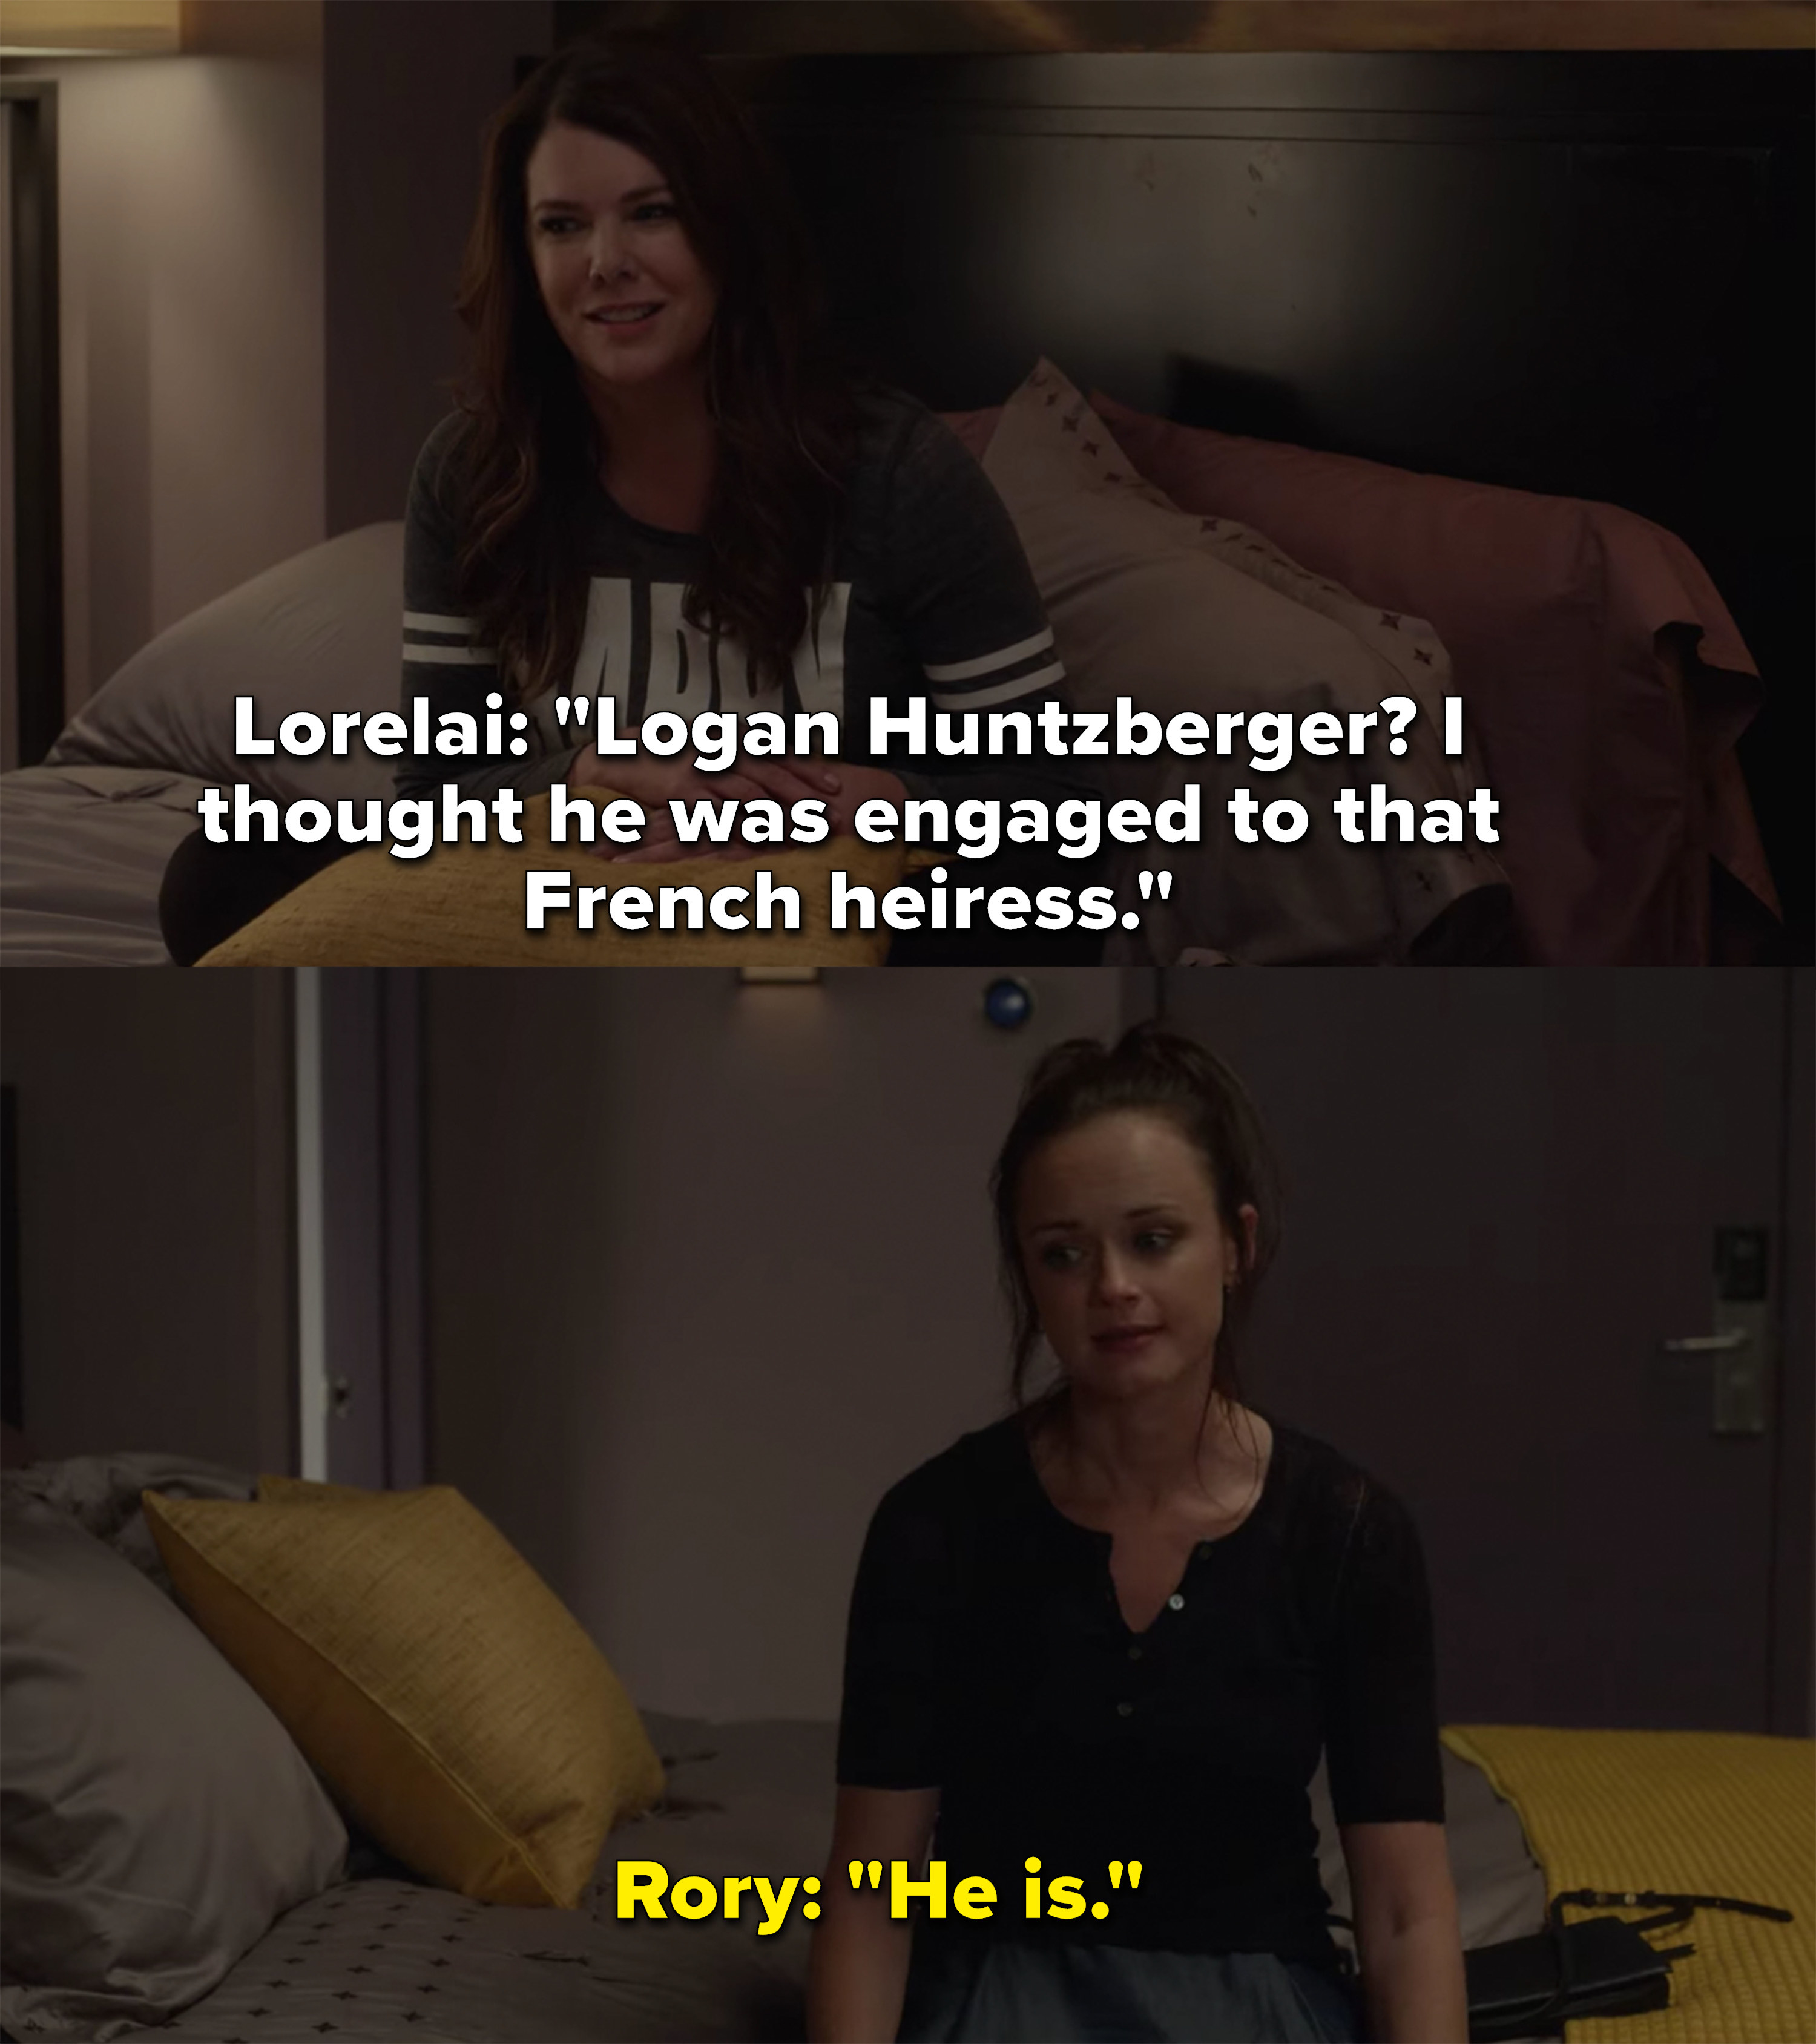 Lorelai says she thought Logan was engaged to a French heiress and Rory casually replies that he is